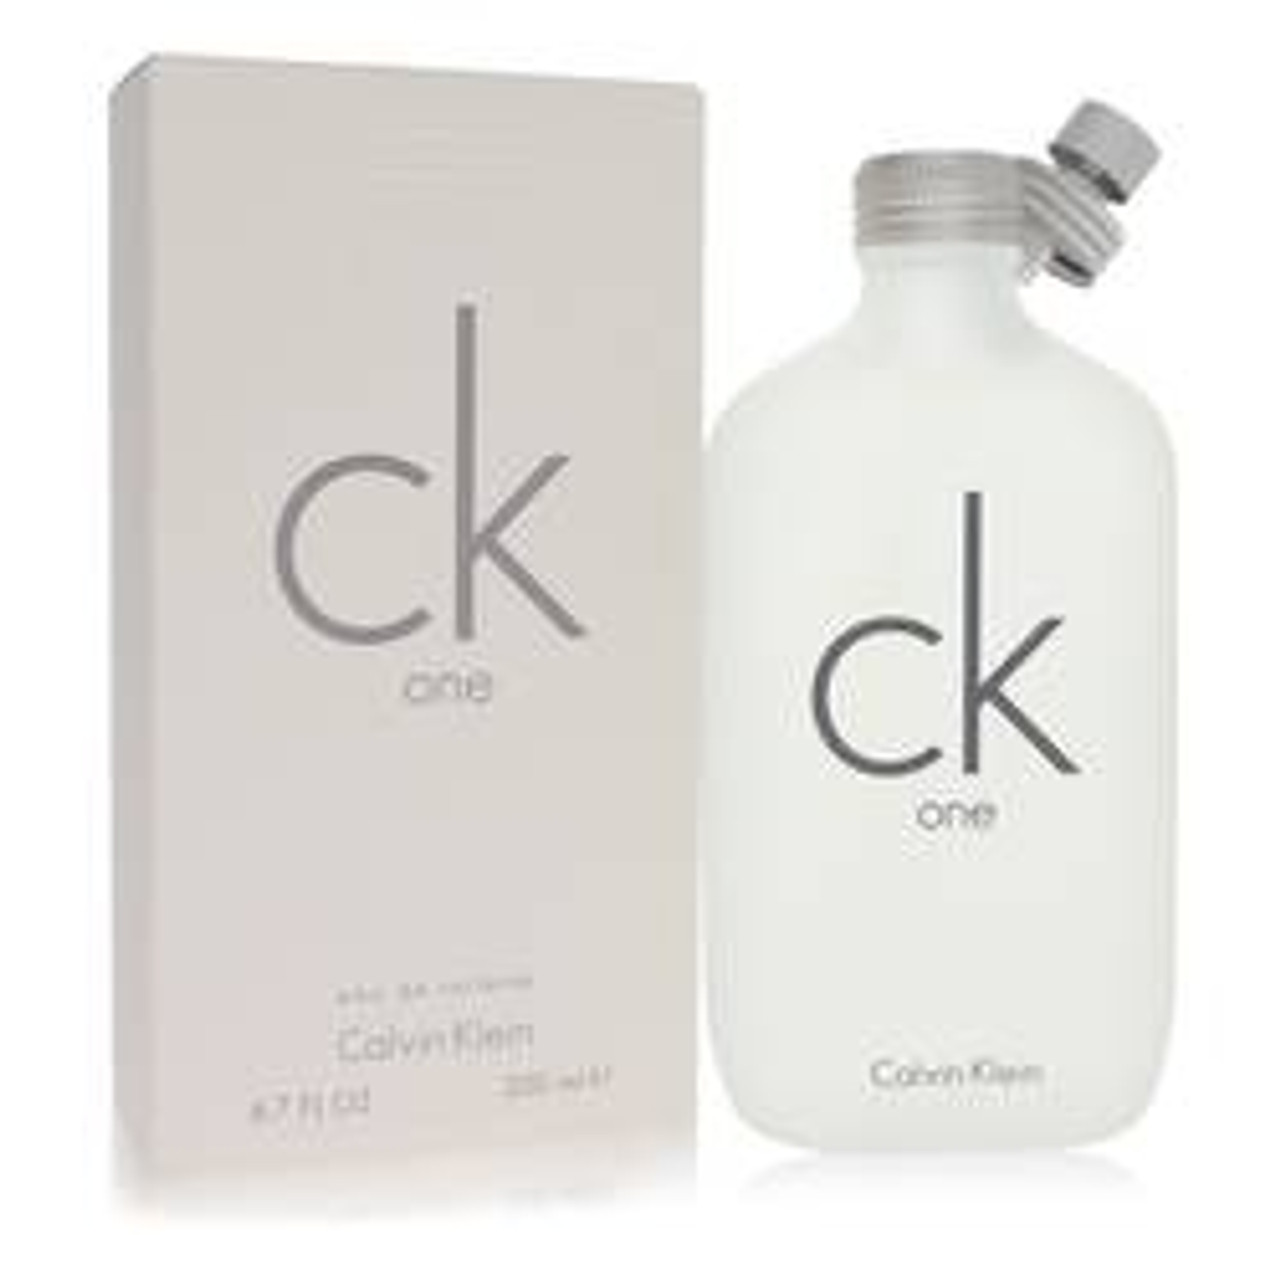 Ck One Cologne By Calvin Klein Eau De Toilette Spray (Unisex) 6.6 oz for Men - [From 120.00 - Choose pk Qty ] - *Ships from Miami